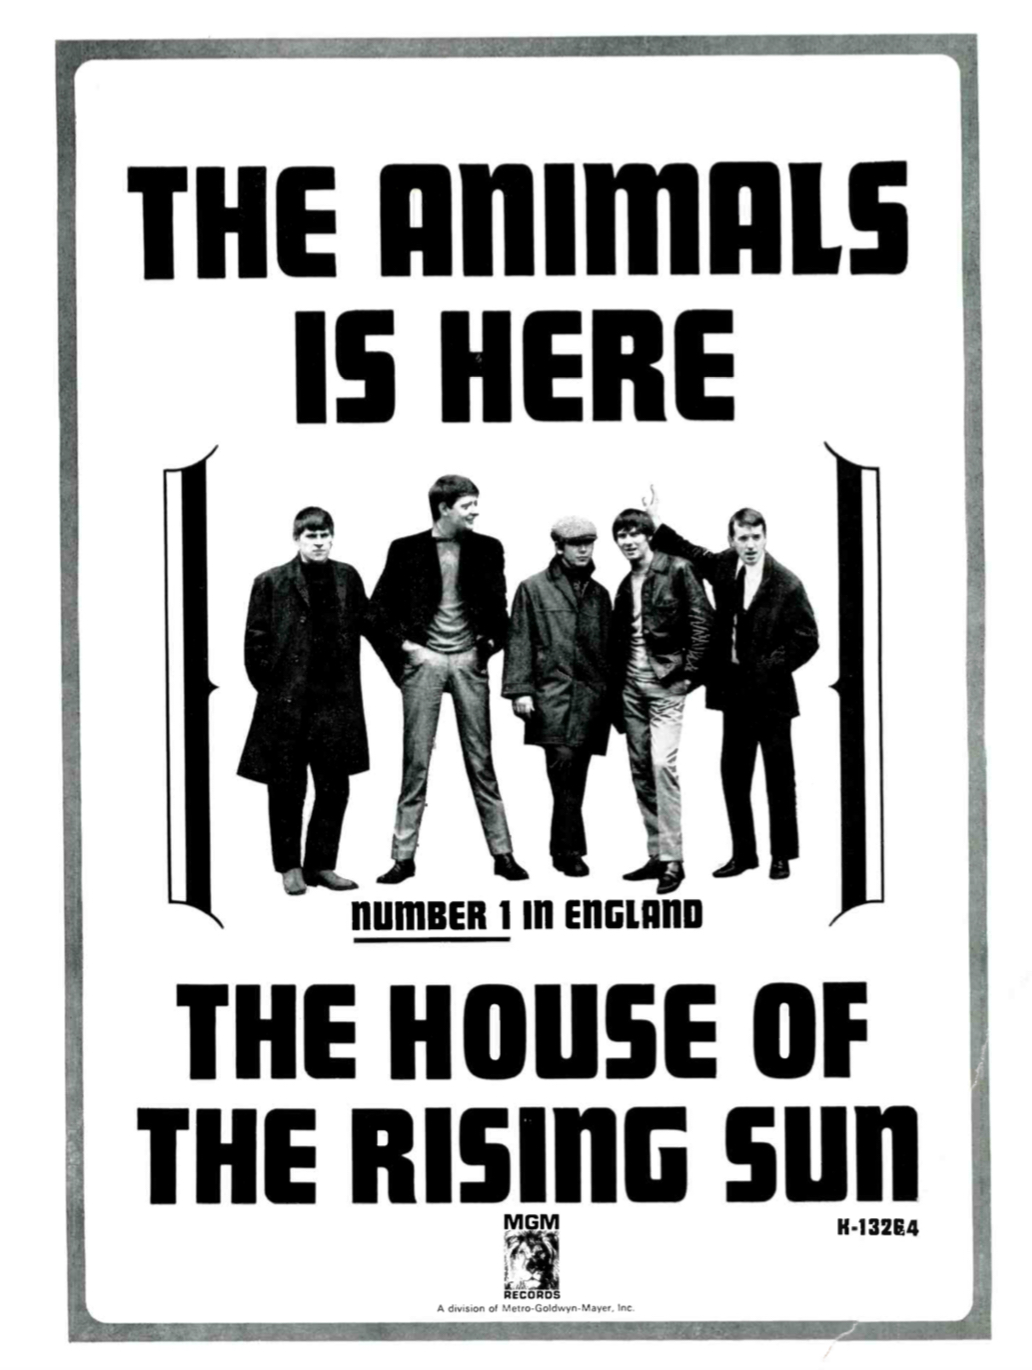 July 25, '64: Animals 'Rising Sun' Debuts, Causes Rift | Best Classic Bands